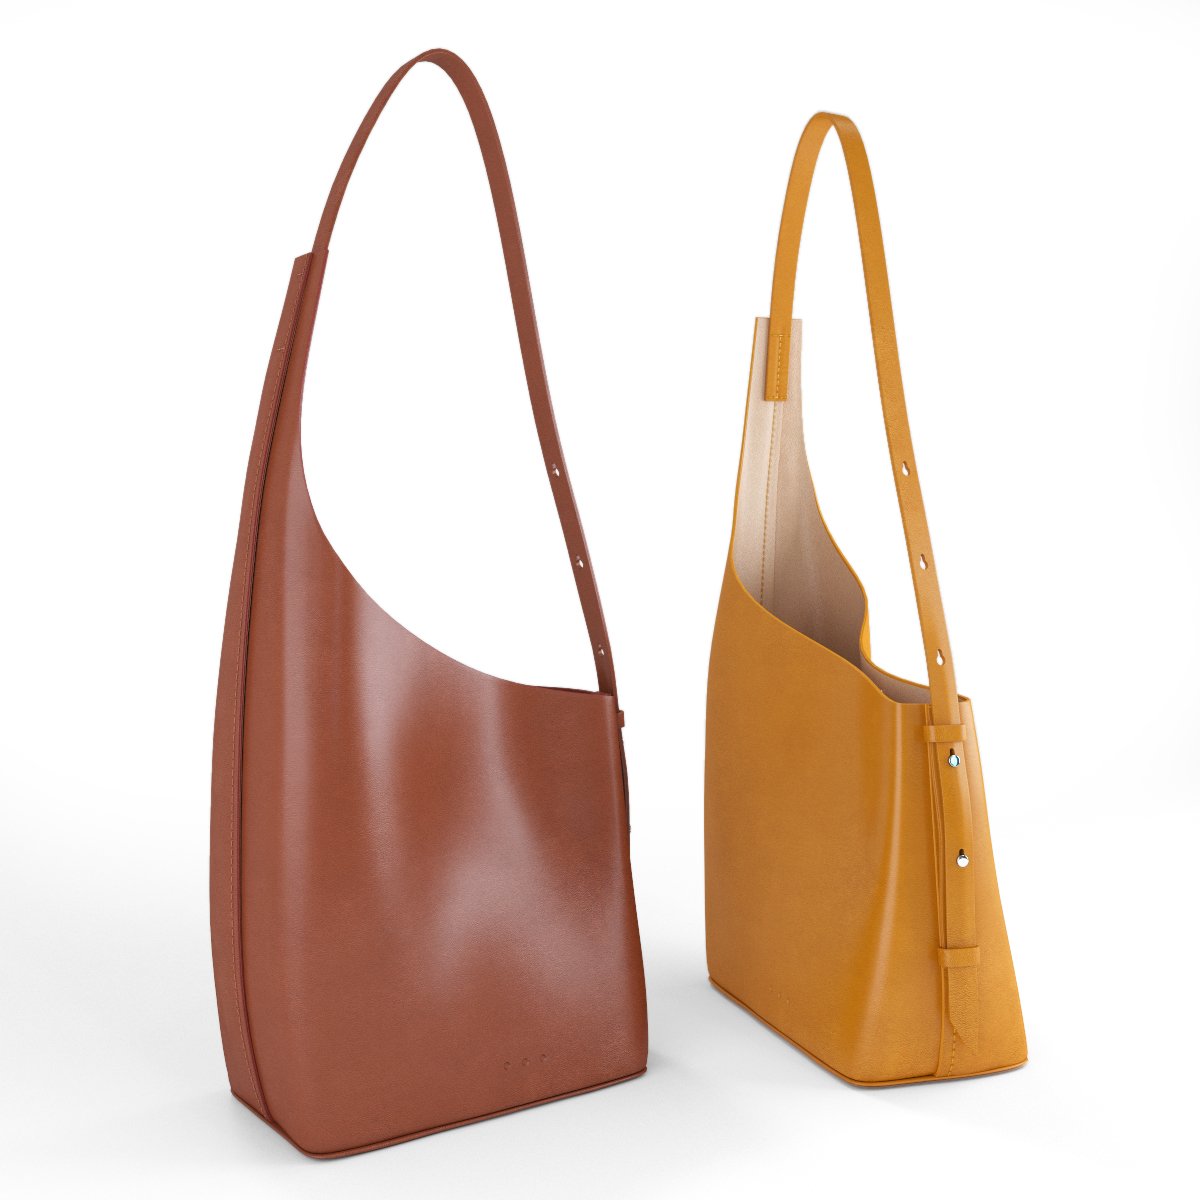 3D model Lv Tote bag colors Lowpoly VR / AR / low-poly